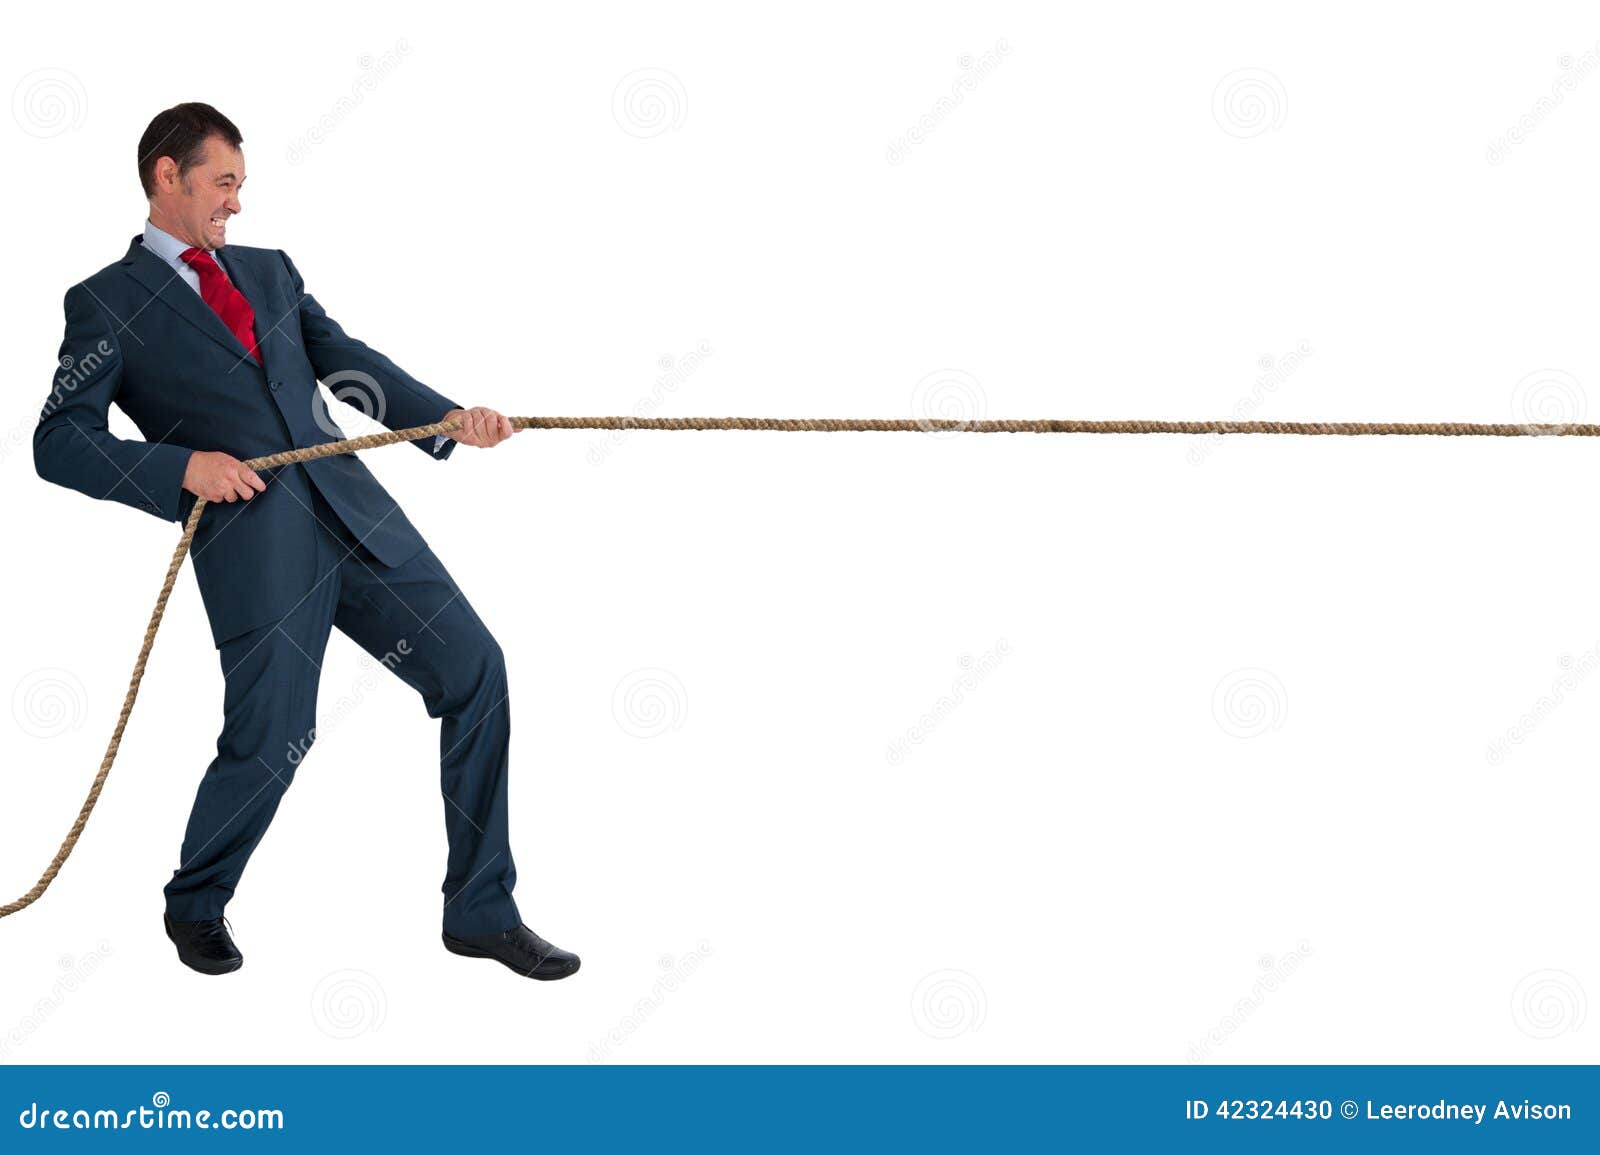 Businessman pulling a rope stock photo. Image of pulling - 42324430